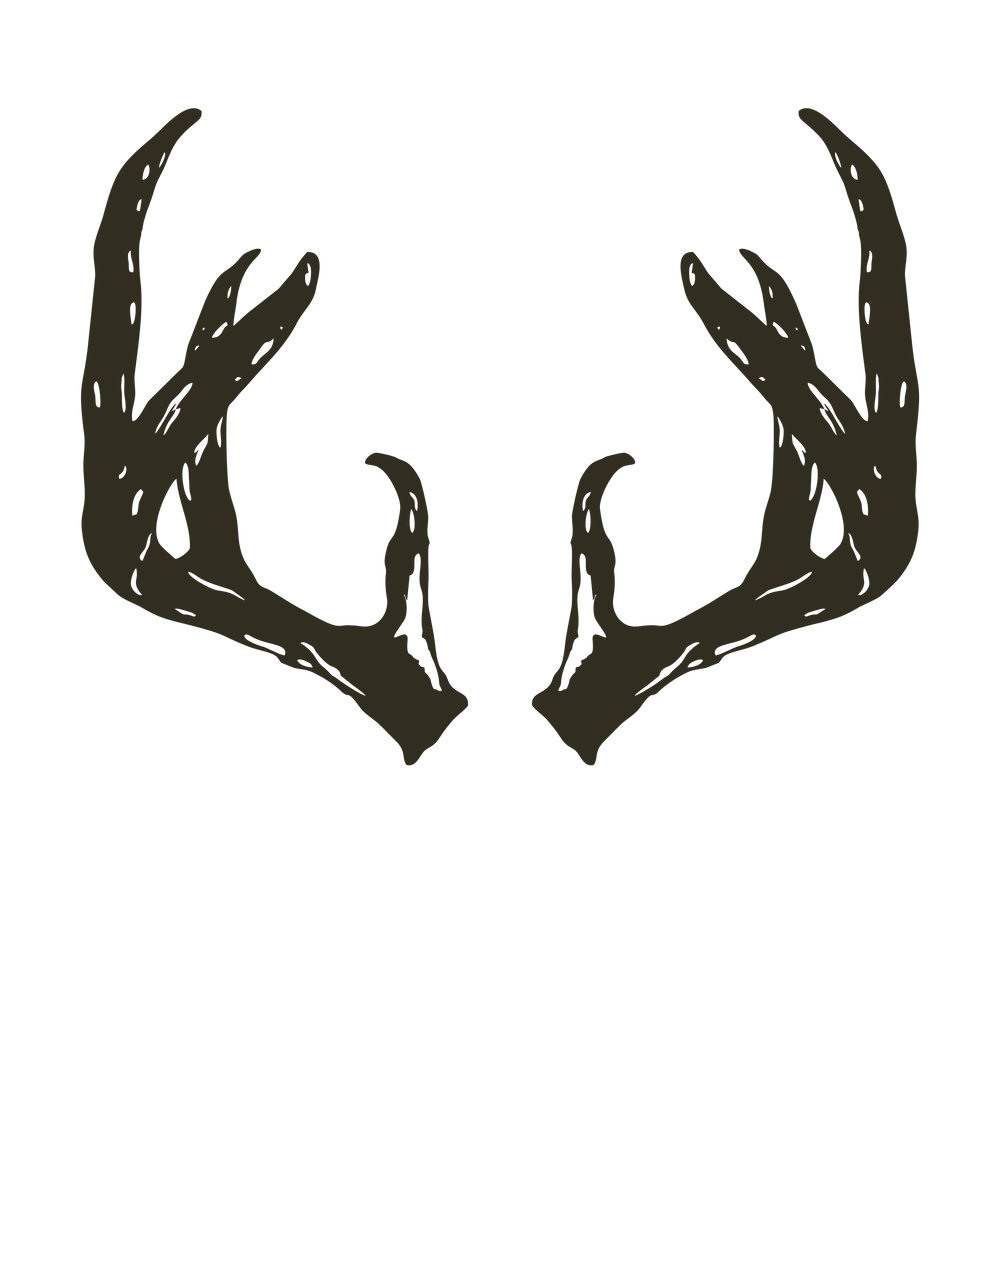 A sketch-style Antler Tee on black background, embodying comfort with 100% ring-spun cotton. Relaxed fit, durable double-needle stitching, and seamless design for a unique, cozy addition to your wardrobe.